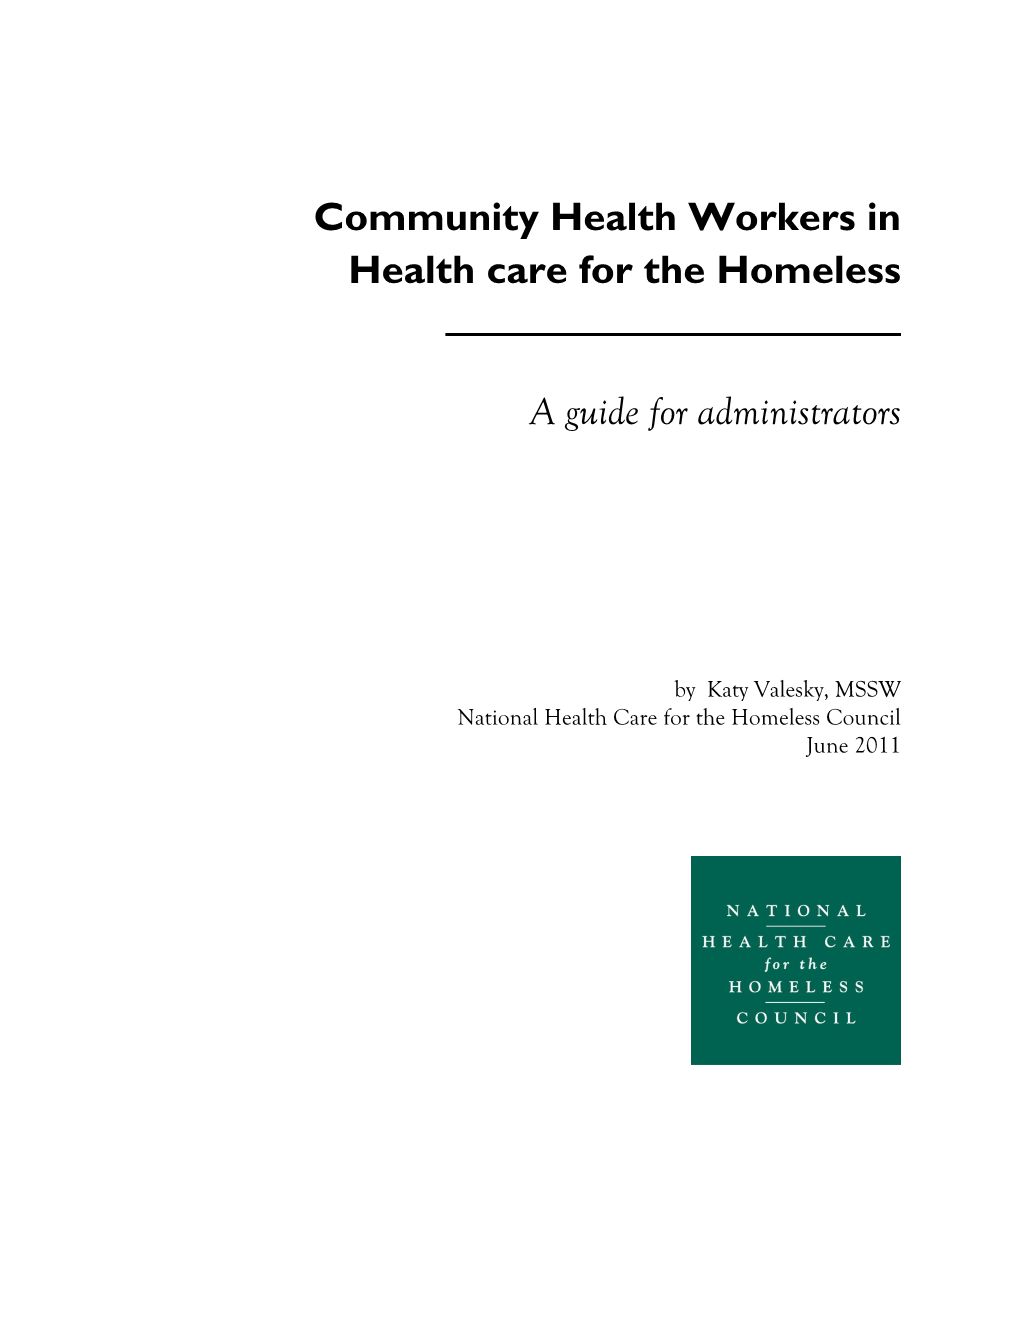 Community Health Workers in Health Care for the Homeless a Guide For